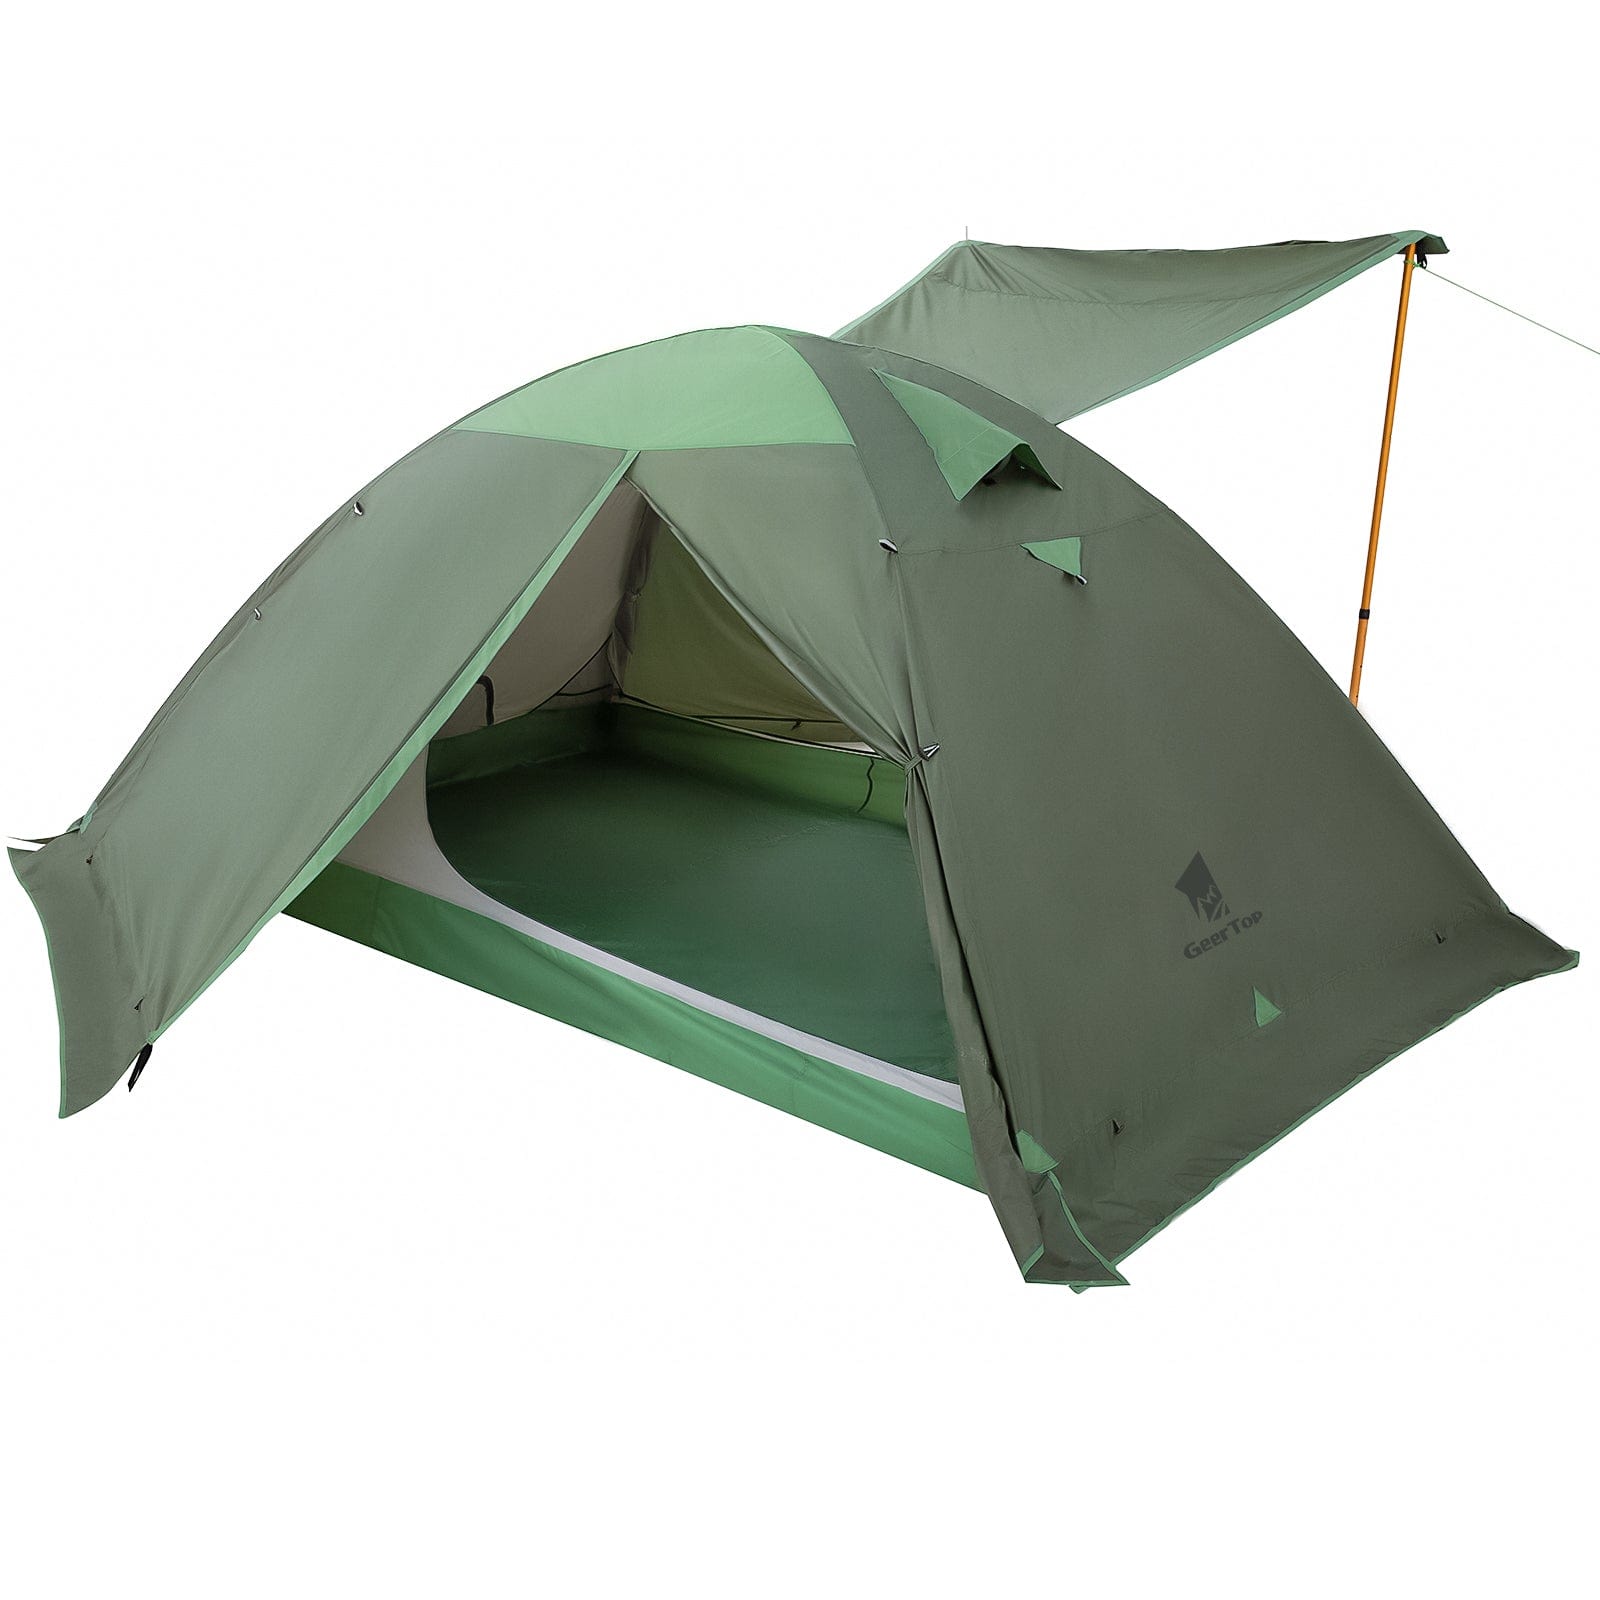 6 Person 4 Season Large Family Camping Tent